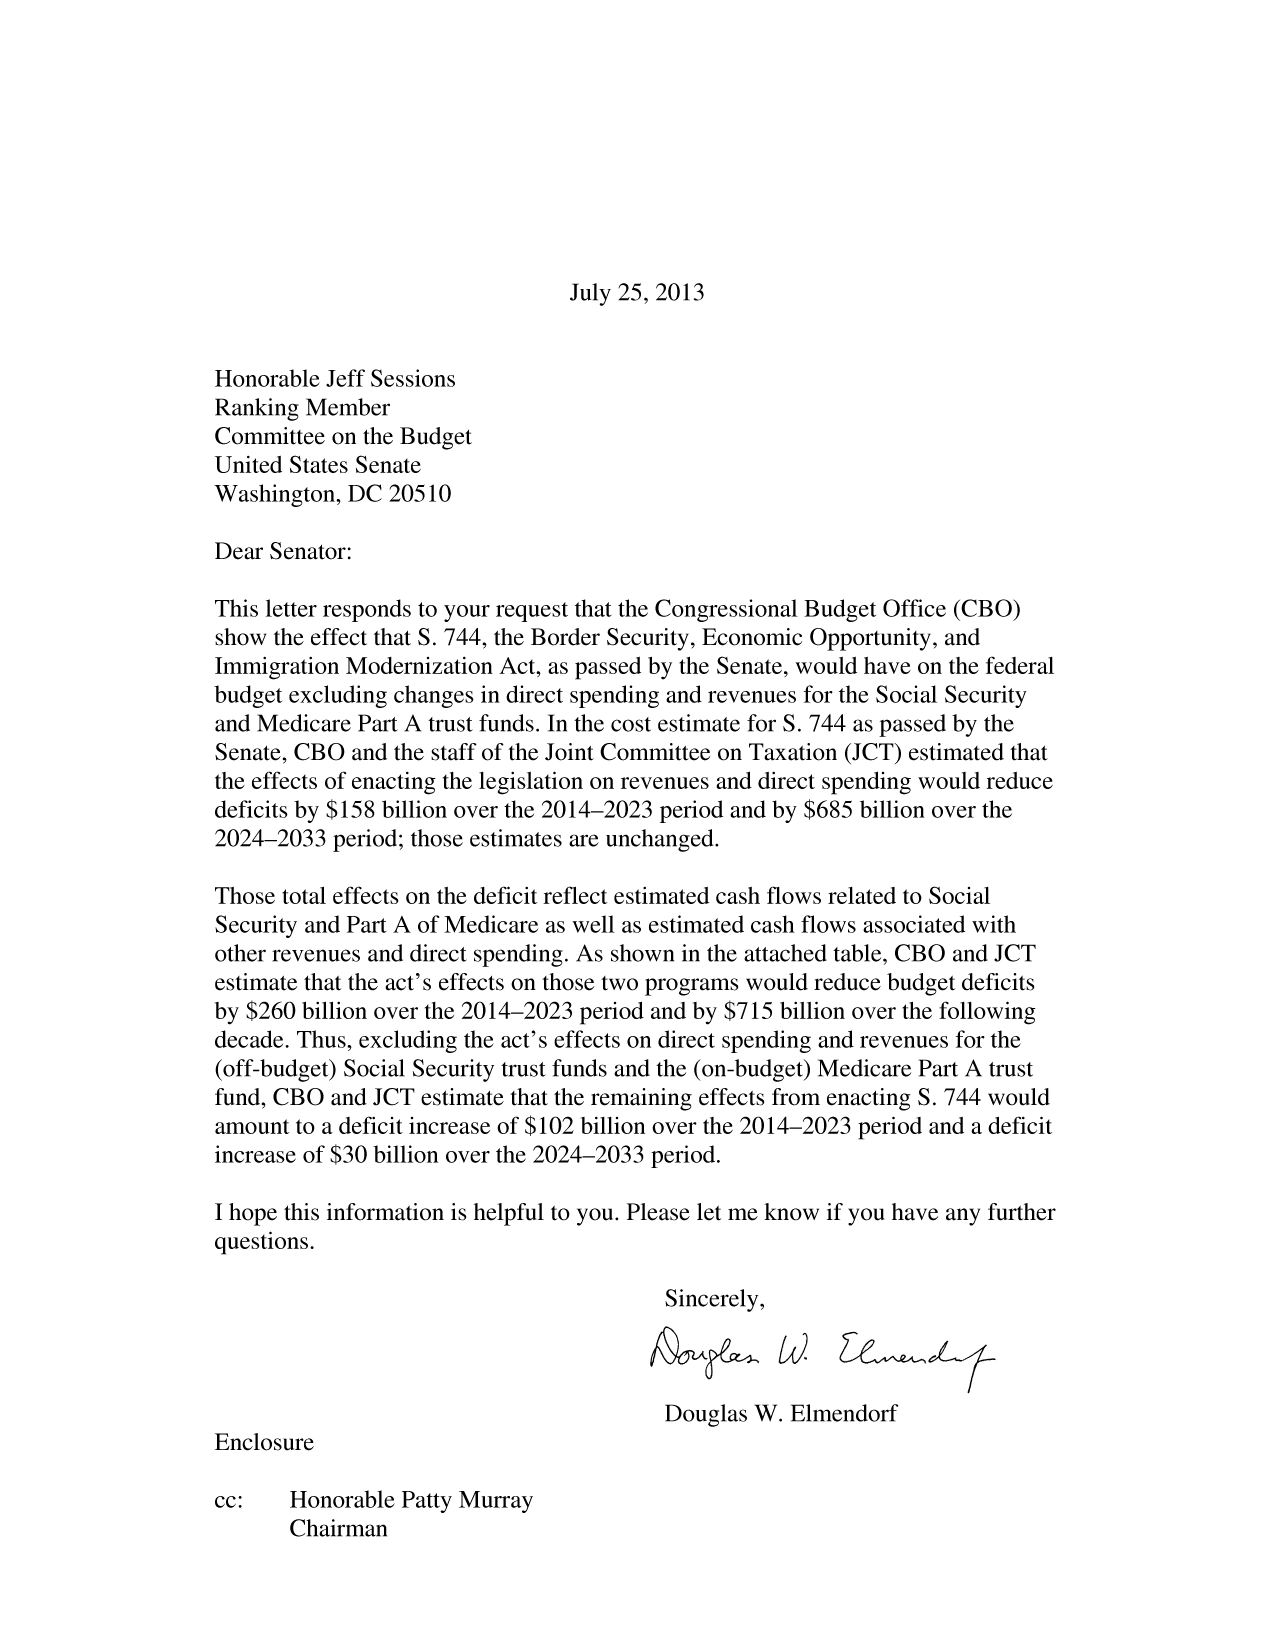 handle is hein.congrec/cbo1742 and id is 1 raw text is: July 25, 2013

Honorable Jeff Sessions
Ranking Member
Committee on the Budget
United States Senate
Washington, DC 20510
Dear Senator:
This letter responds to your request that the Congressional Budget Office (CBO)
show the effect that S. 744, the Border Security, Economic Opportunity, and
Immigration Modernization Act, as passed by the Senate, would have on the federal
budget excluding changes in direct spending and revenues for the Social Security
and Medicare Part A trust funds. In the cost estimate for S. 744 as passed by the
Senate, CBO and the staff of the Joint Committee on Taxation (JCT) estimated that
the effects of enacting the legislation on revenues and direct spending would reduce
deficits by $158 billion over the 2014-2023 period and by $685 billion over the
2024-2033 period; those estimates are unchanged.
Those total effects on the deficit reflect estimated cash flows related to Social
Security and Part A of Medicare as well as estimated cash flows associated with
other revenues and direct spending. As shown in the attached table, CBO and JCT
estimate that the act's effects on those two programs would reduce budget deficits
by $260 billion over the 2014-2023 period and by $715 billion over the following
decade. Thus, excluding the act's effects on direct spending and revenues for the
(off-budget) Social Security trust funds and the (on-budget) Medicare Part A trust
fund, CBO and JCT estimate that the remaining effects from enacting S. 744 would
amount to a deficit increase of $102 billion over the 2014-2023 period and a deficit
increase of $30 billion over the 2024-2033 period.
I hope this information is helpful to you. Please let me know if you have any further
questions.
Sincerely,
Douglas W. Elmendorf
Enclosure
cc: Honorable Patty Murray
Chairman


